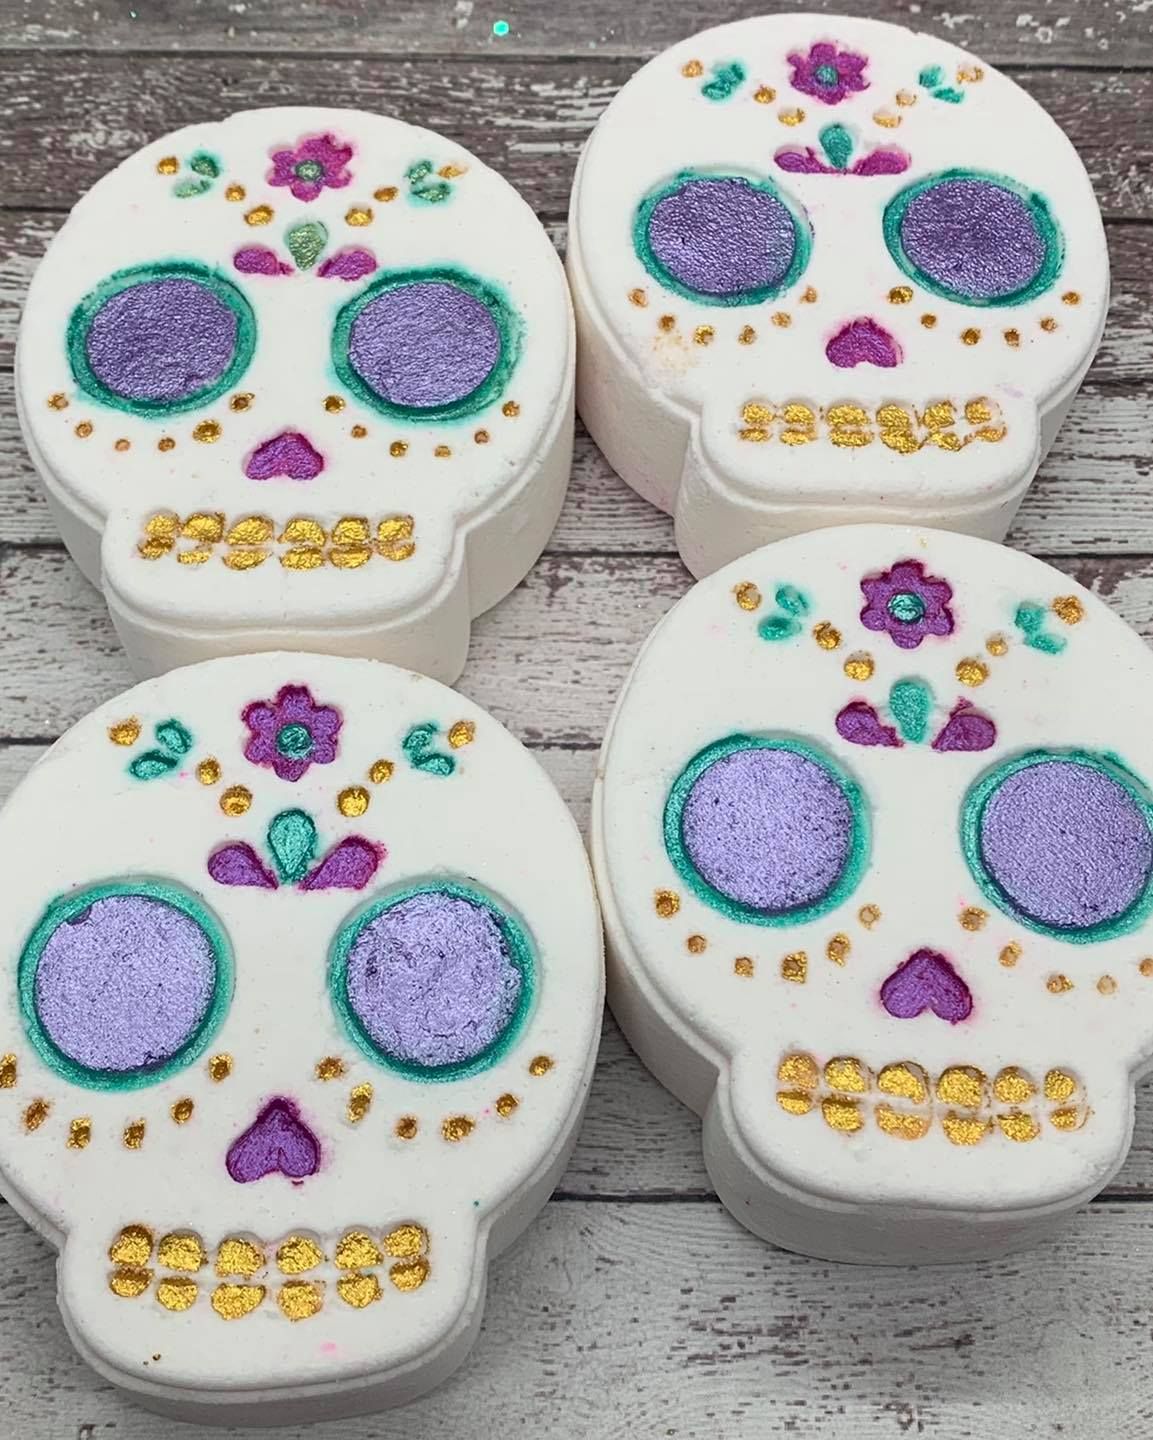 177261213_909190329858789_8532262203346986131_n.jpg Download STL file MEXICAN SKULL COLLECTION - MOLD BATH BOMB, SOLID SHAMPOO - MOLD BATH BOMB, SOLID SHAMPOO • 3D printing template, pachecolilium